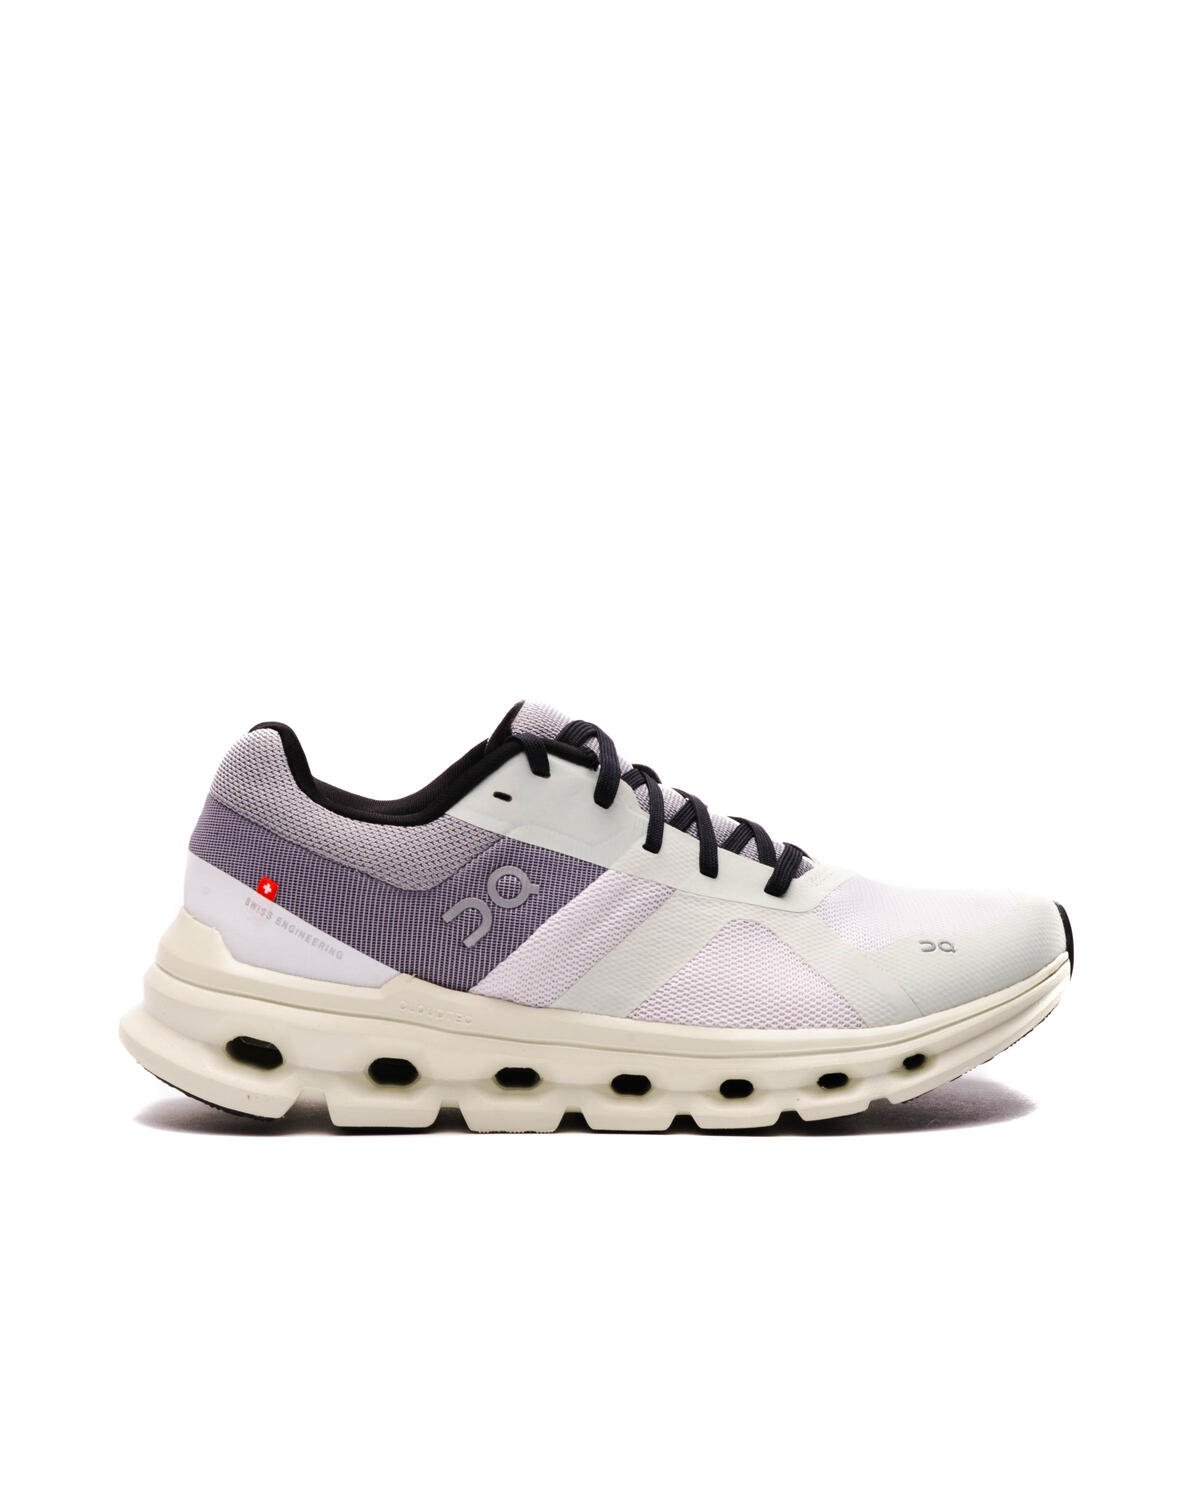 ON WMNS Cloudrunner | 46.99019 | AFEW STORE